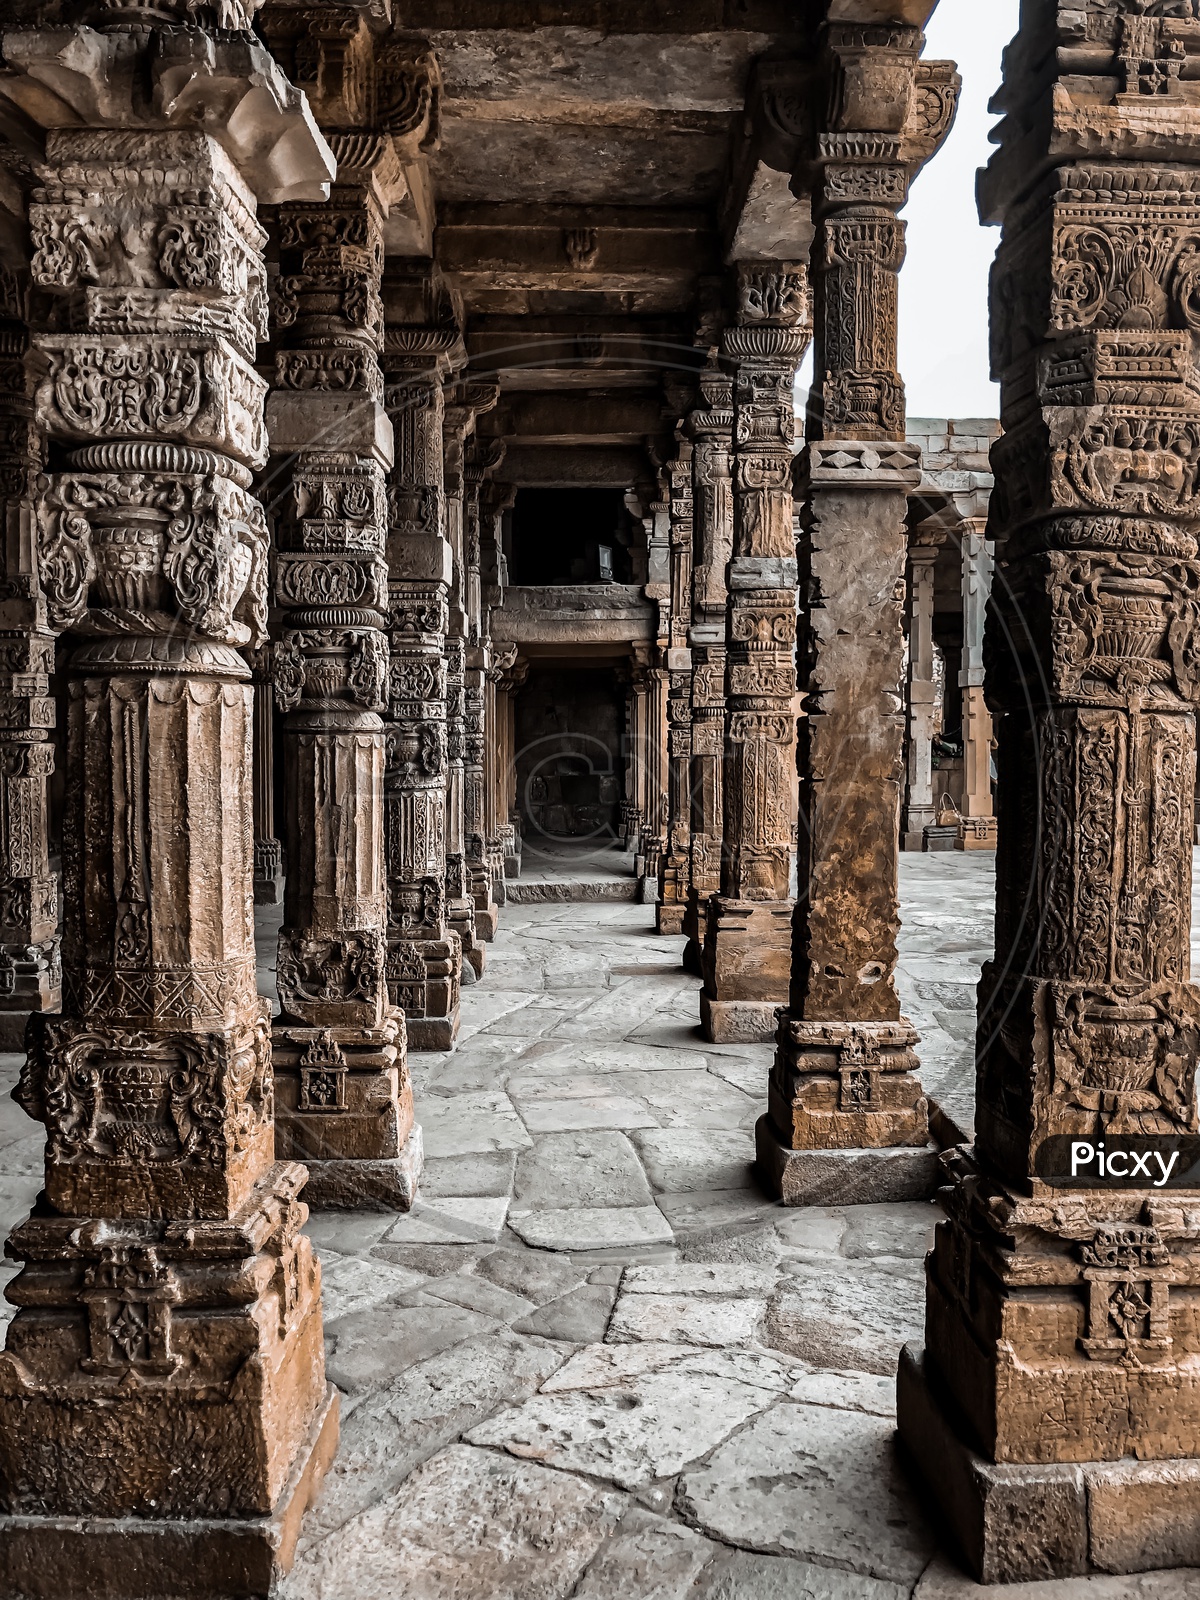 Intricating Stone Carved Pillars of Qutub Complex